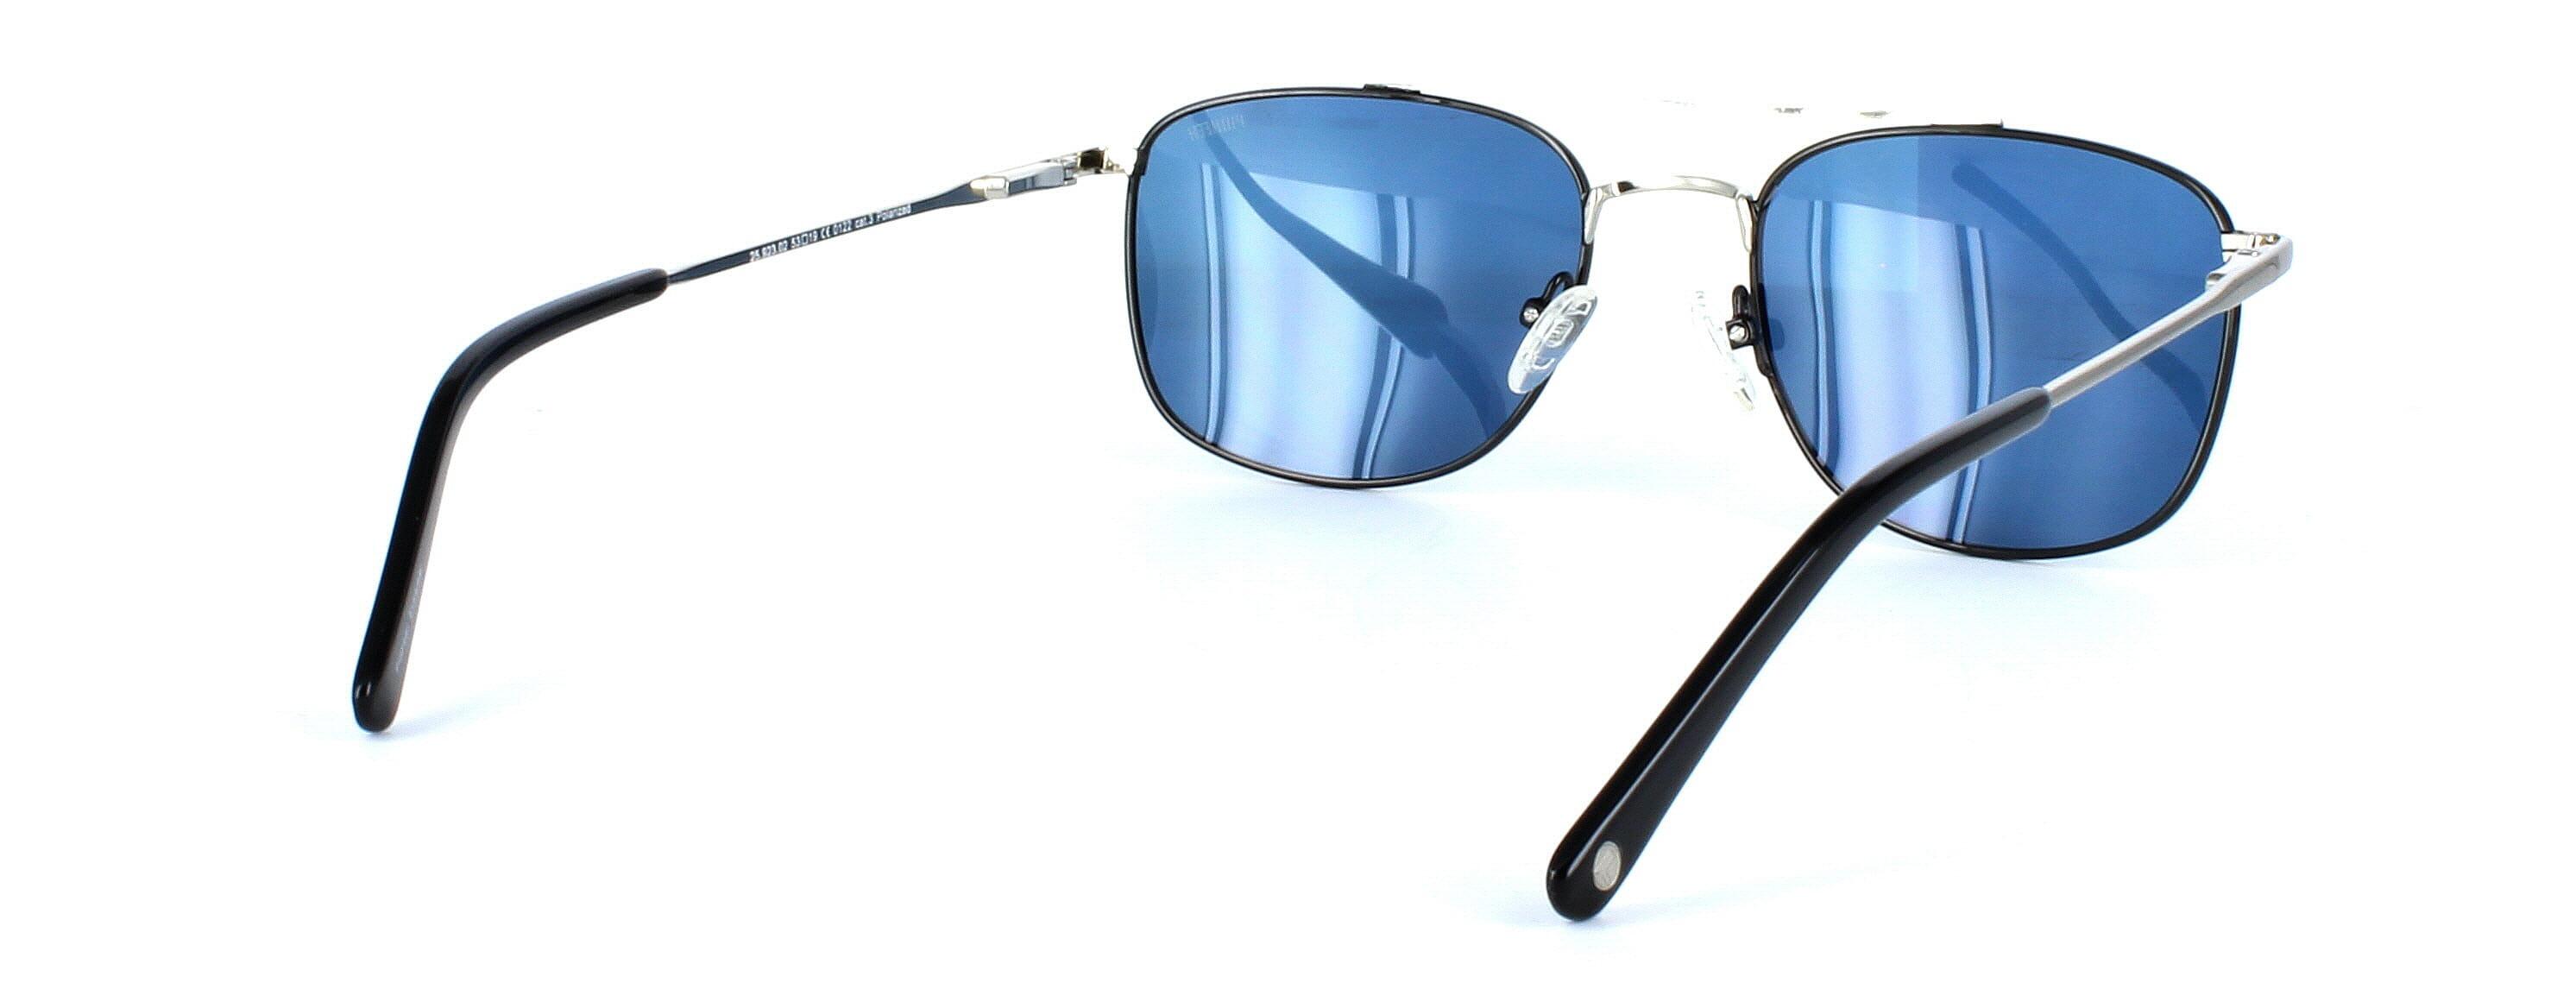 Carlo - Unisex 2-tone aviator style sunglasses here in black and silver - image view 3